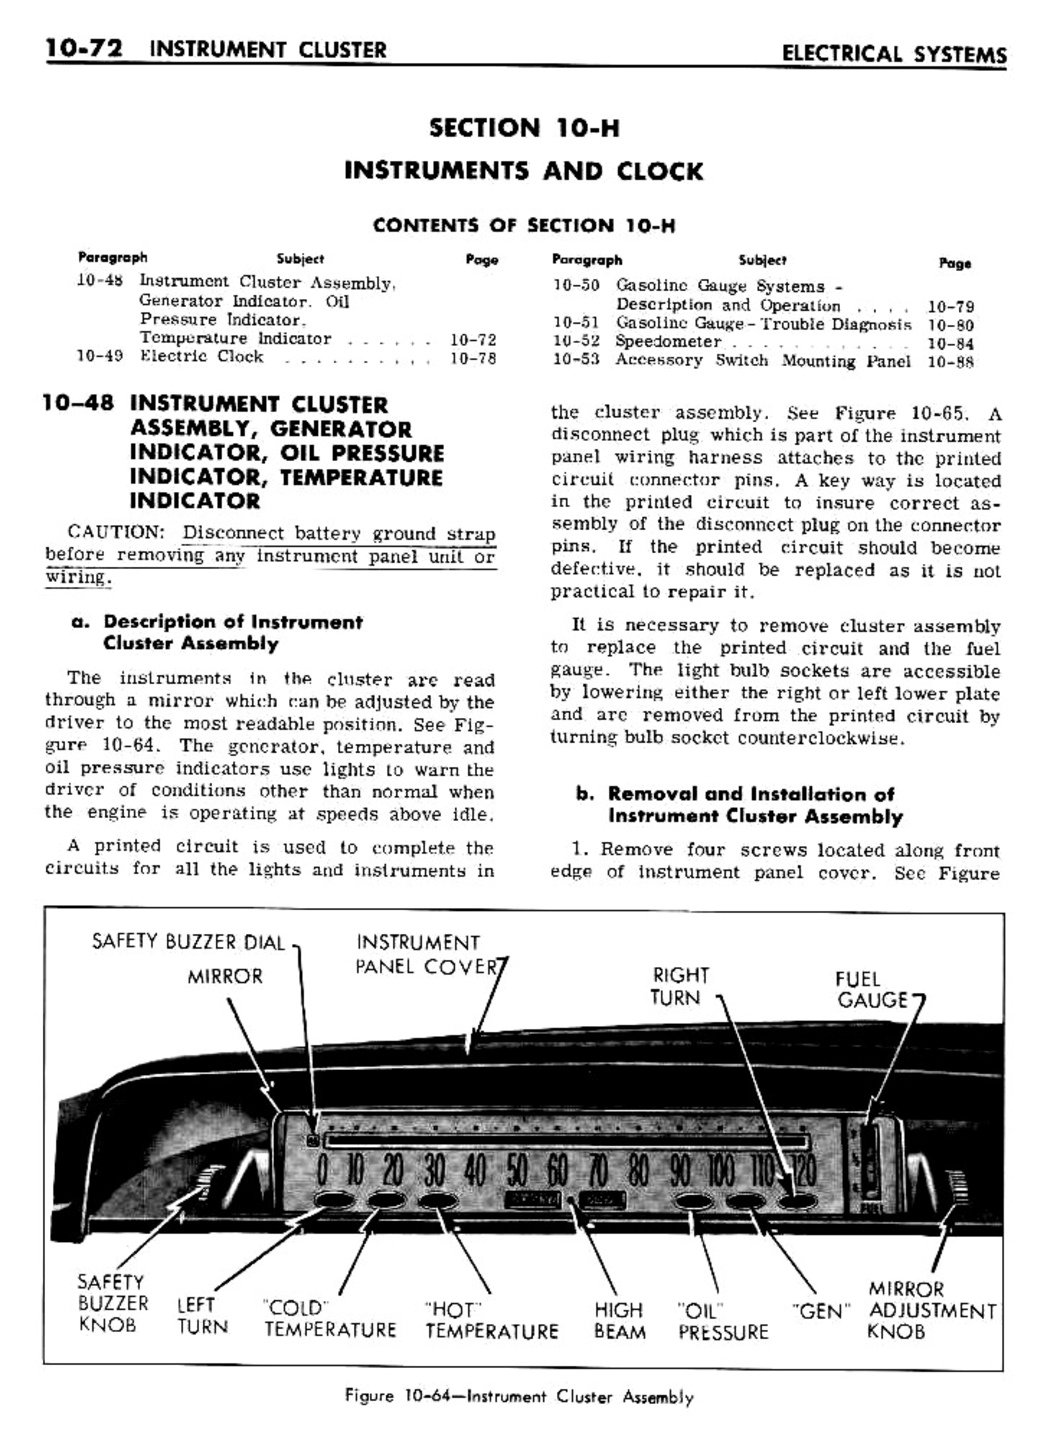 n_10 1961 Buick Shop Manual - Electrical Systems-072-072.jpg